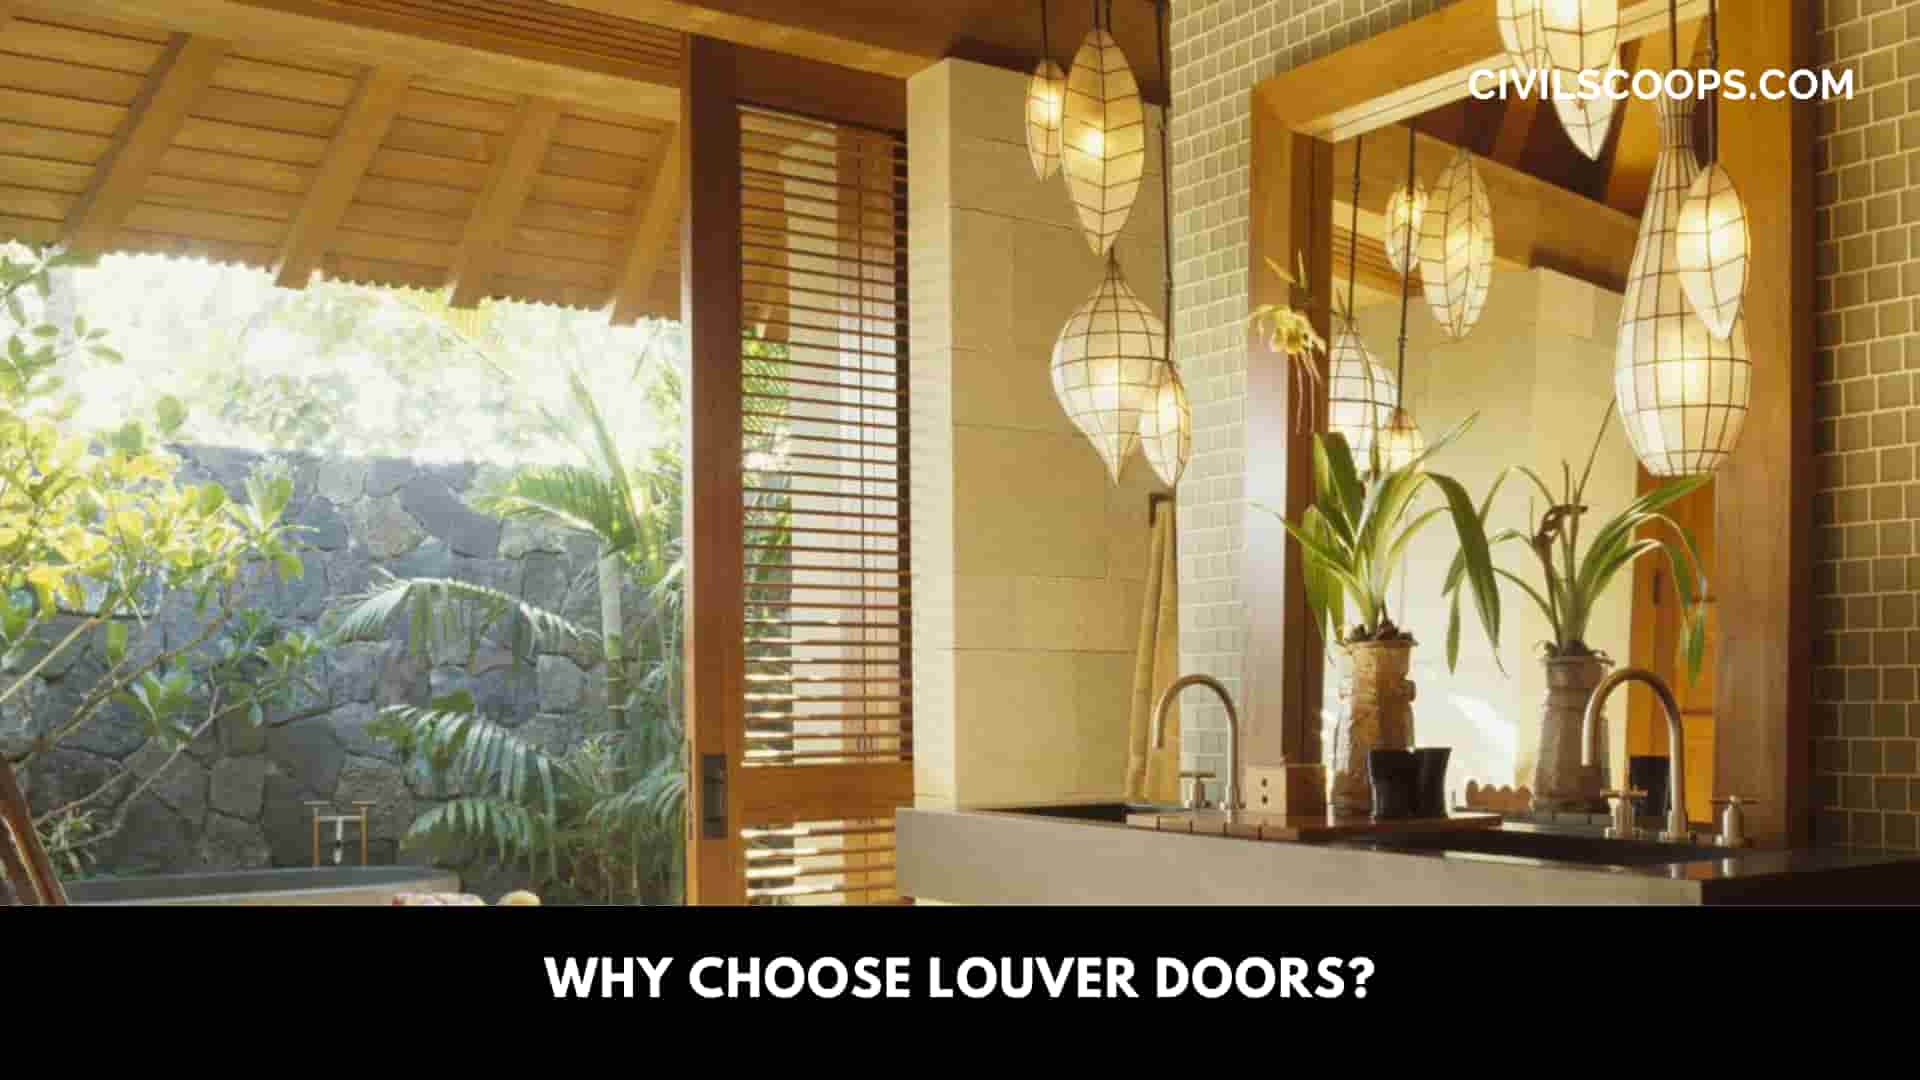 Why Choose Louver Doors?